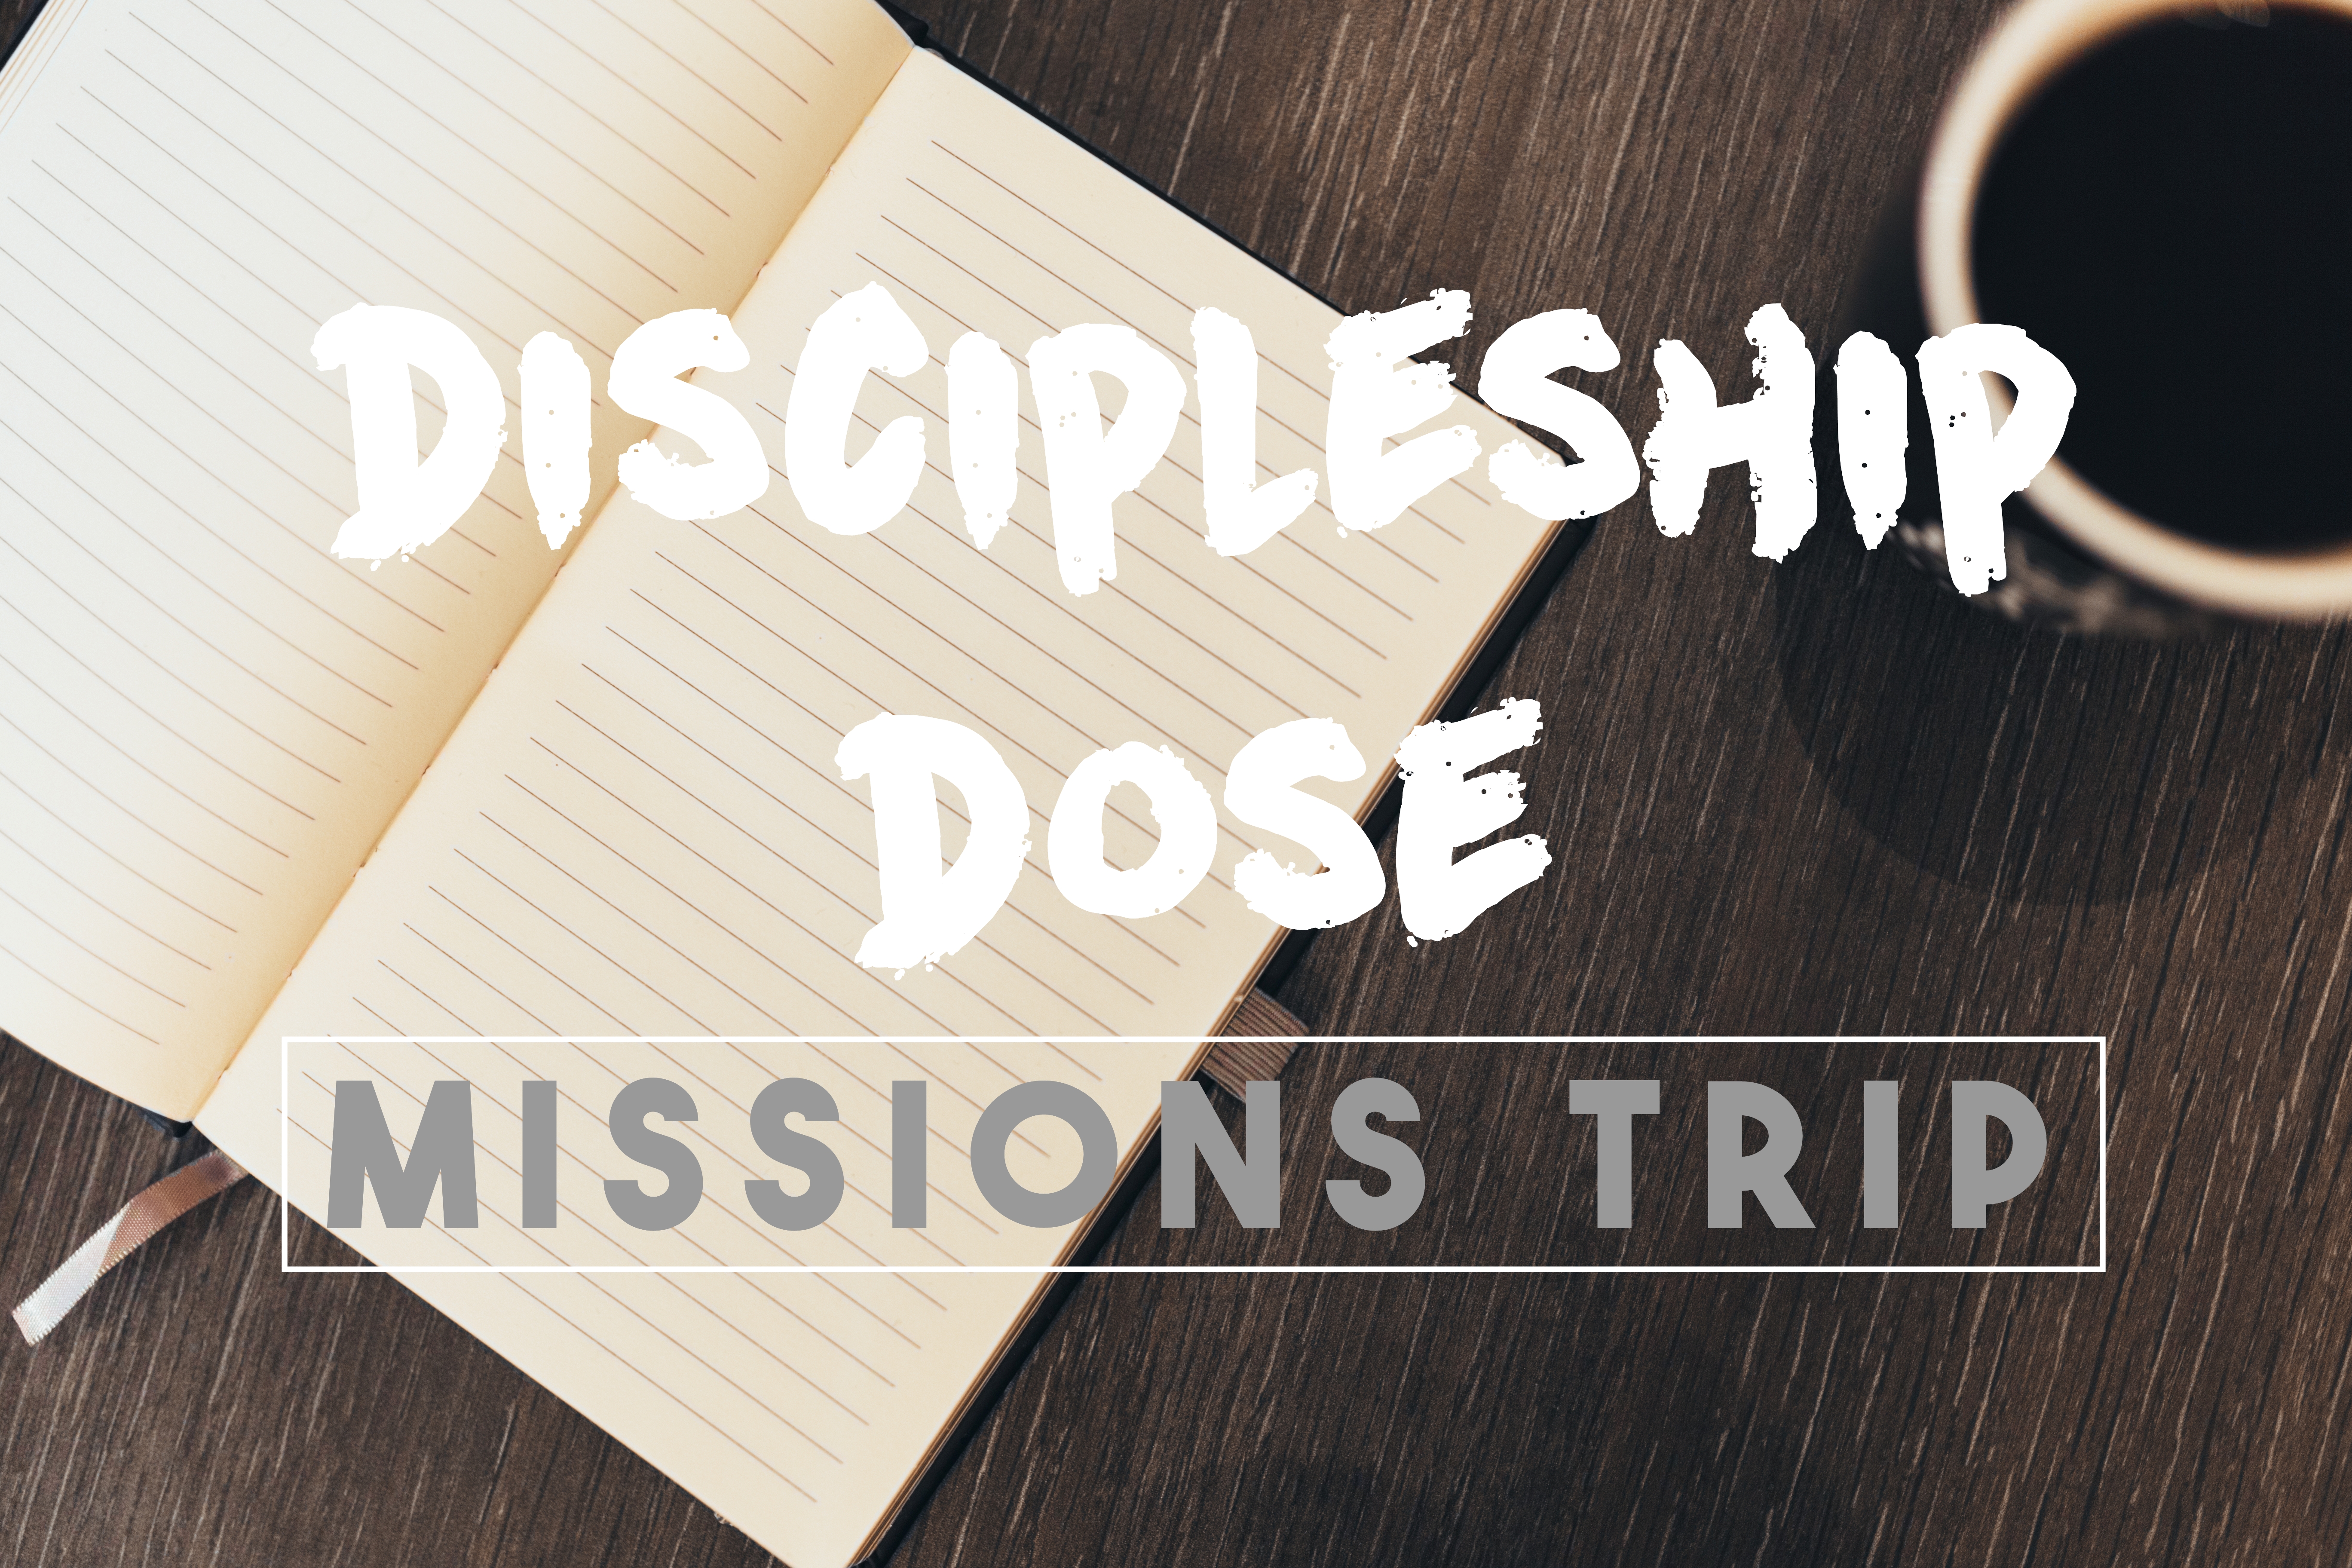 Discipleship Dose Missions Trip (July 22-24)